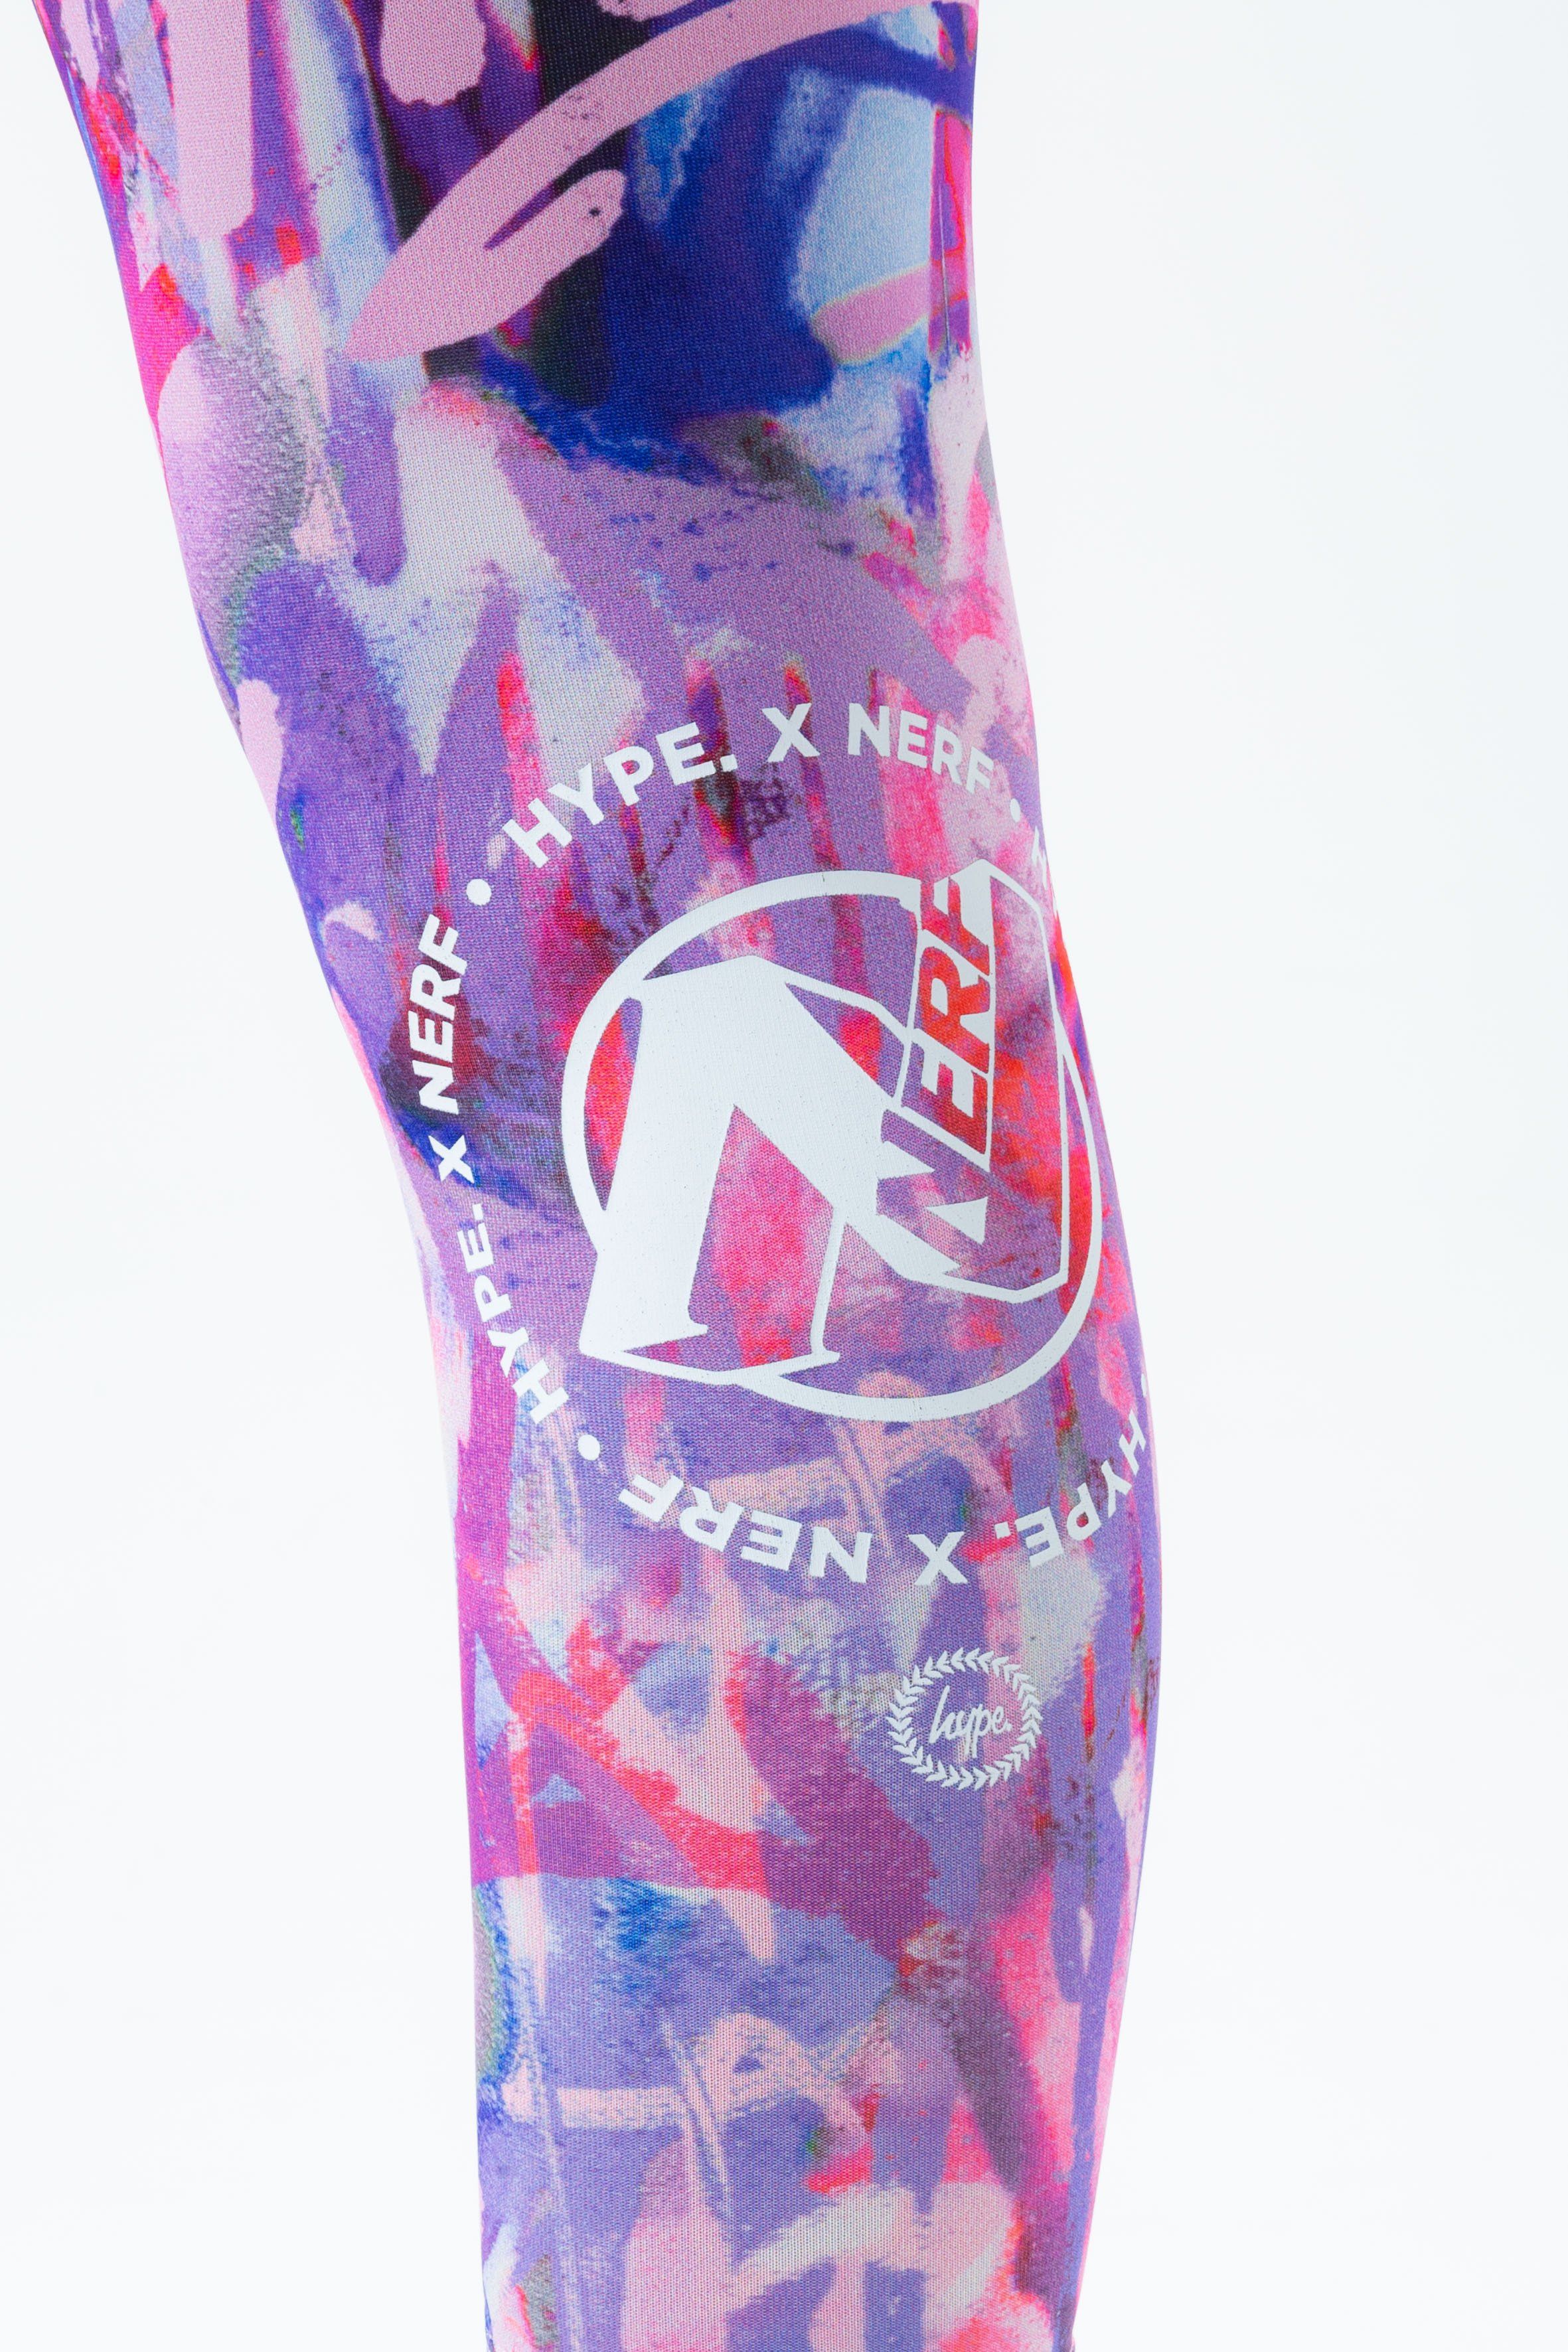 Let us introduce you to the HYPE. x NERF Purple Graffiti Kids Leggings. Featuring the collaborations' core graffiti inspired all-over-print in a purple and pink colour palette. With an elasticated waistband for the perfect wear in our standard girls leggings shape. Wear with an oversized tee for a casual look. Machine wash at 30 degrees.